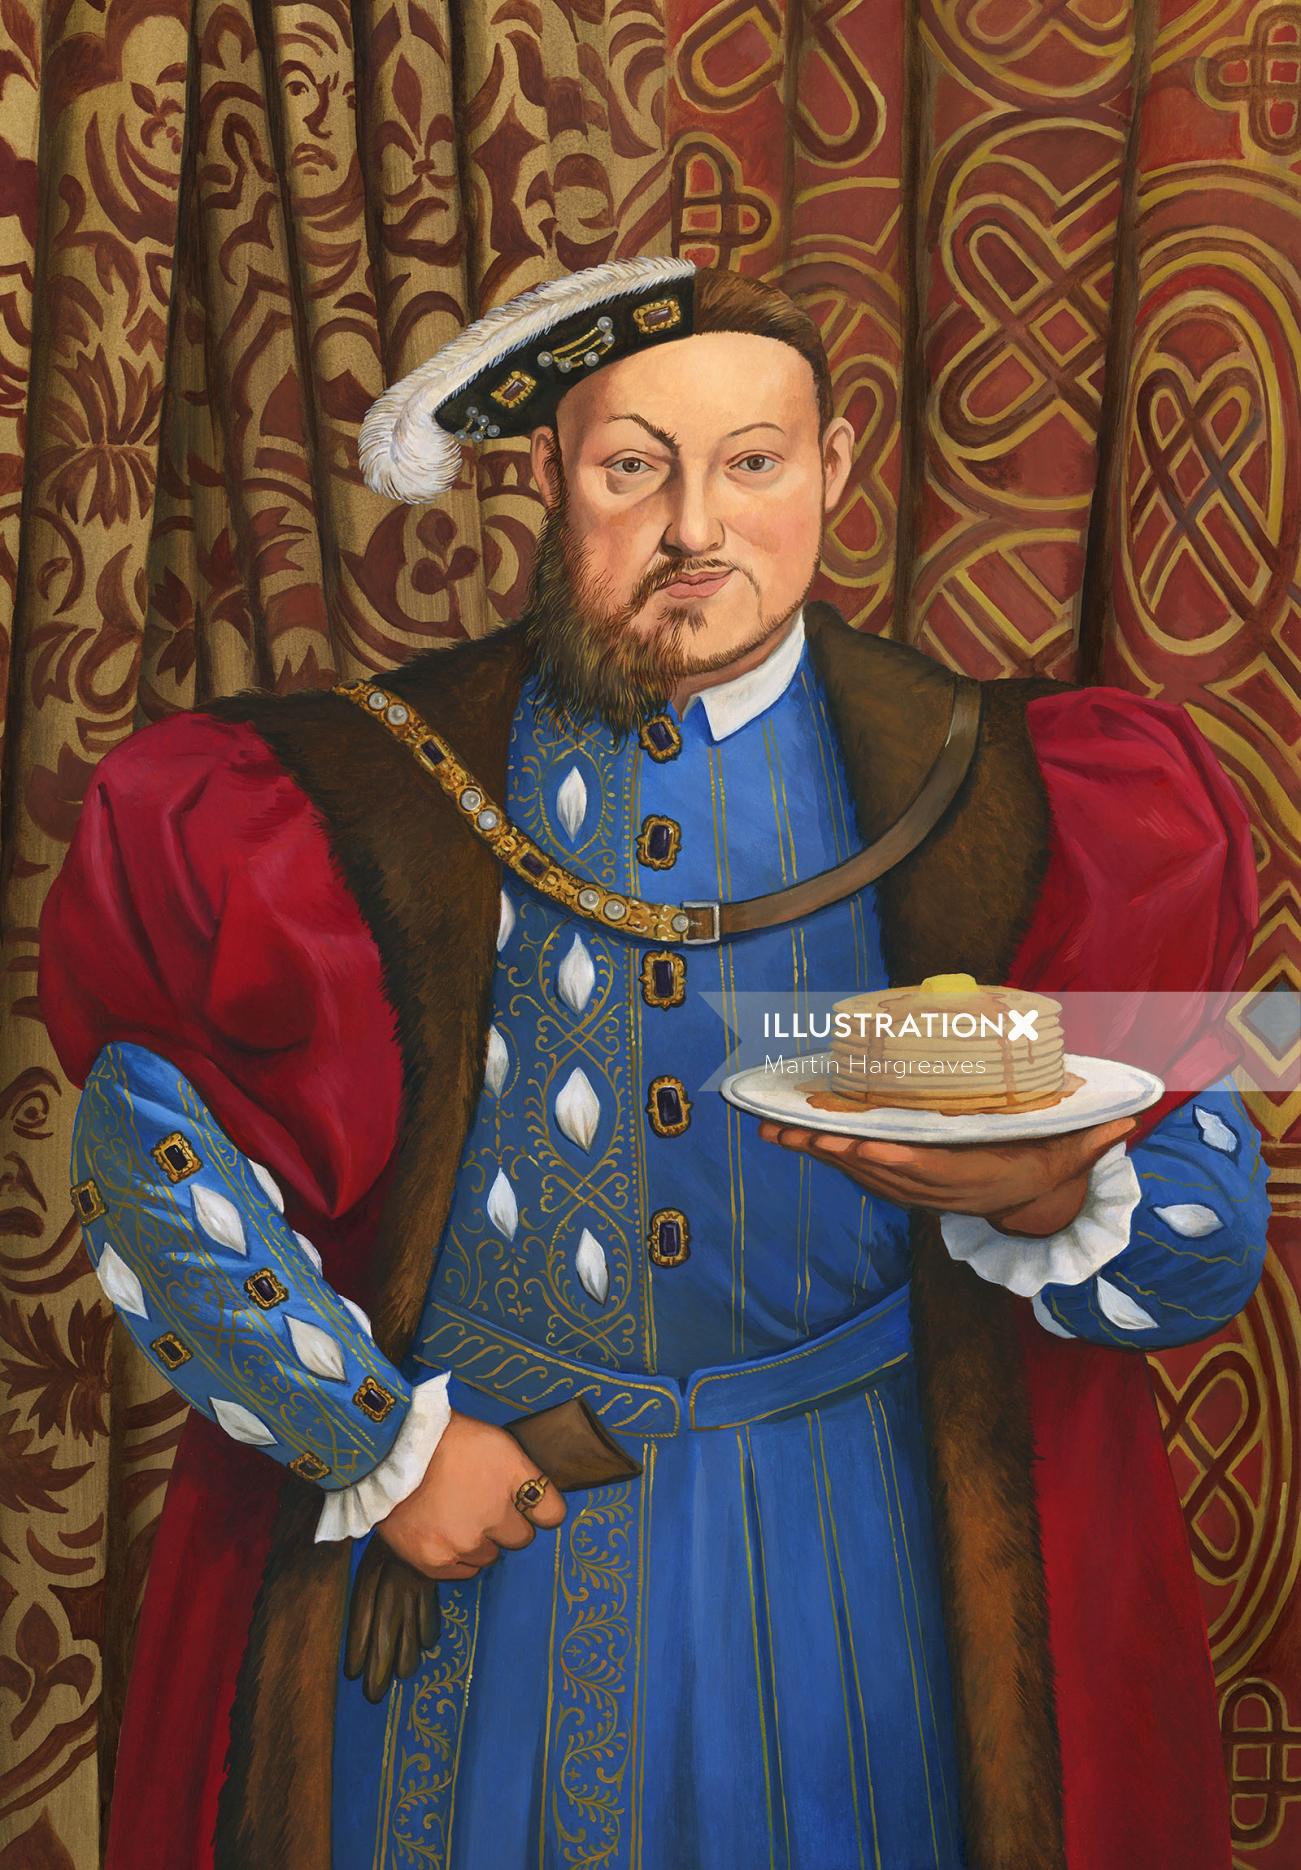 Historical king with cake